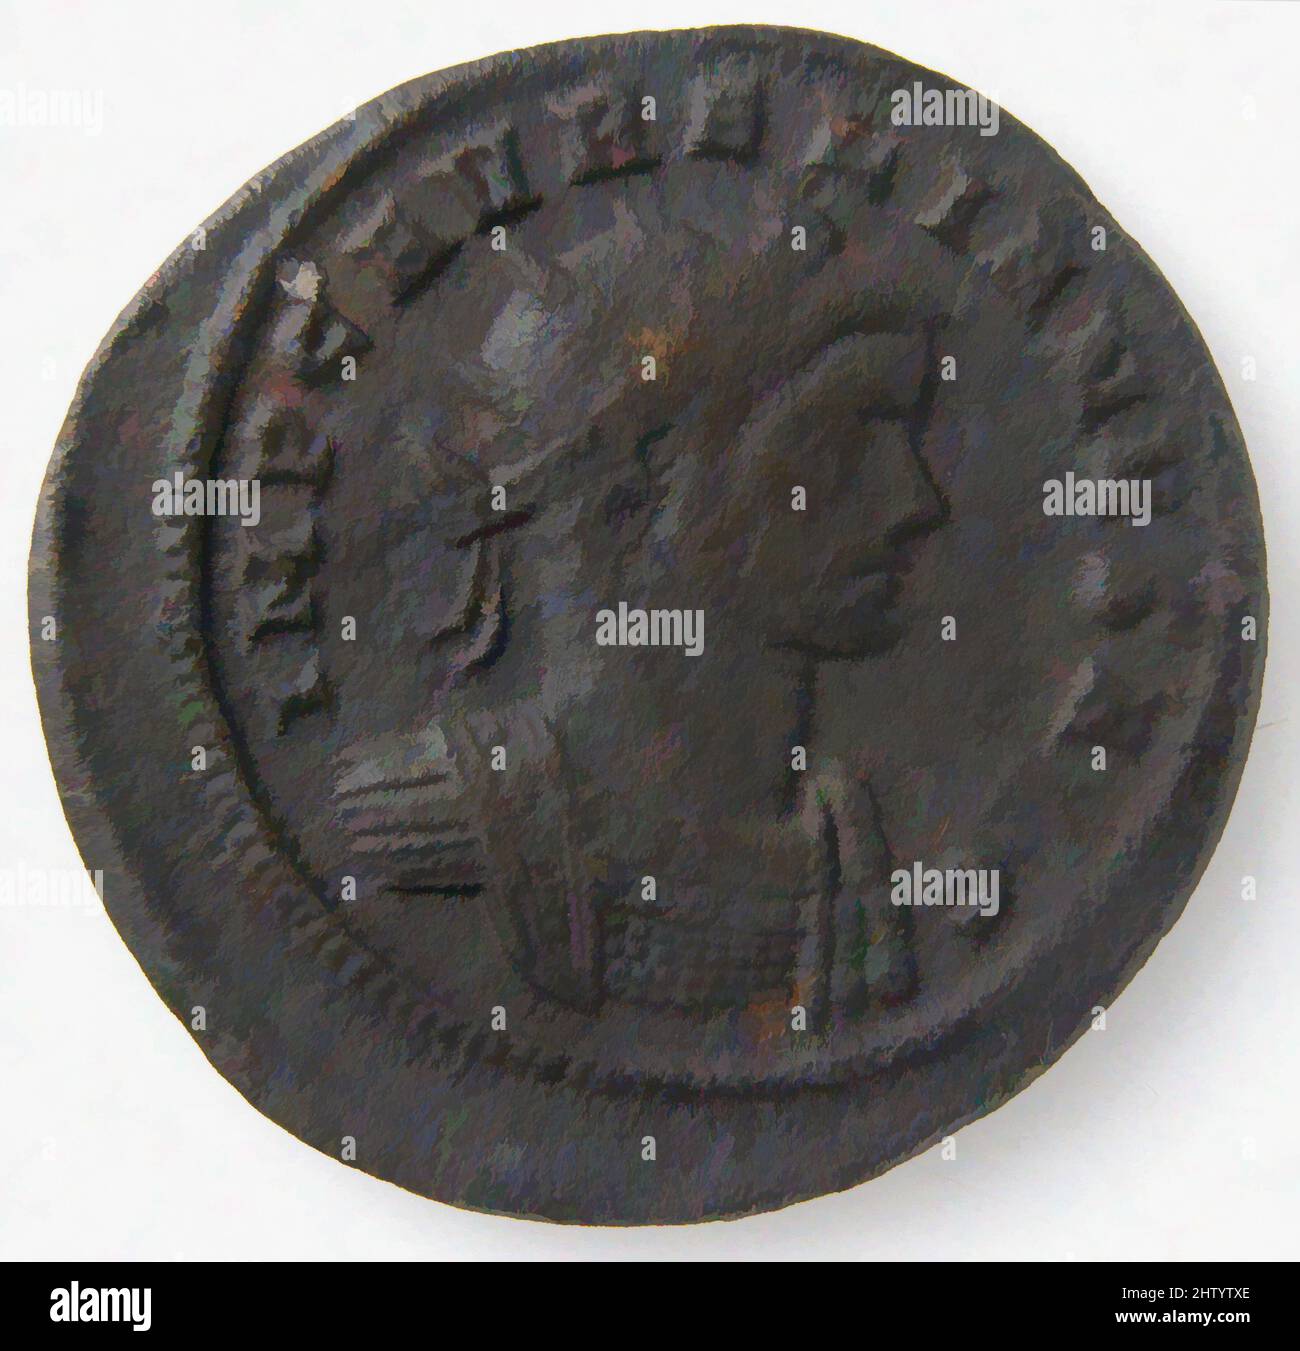 Art inspired by Coin, 270–275, Late Roman, Copper alloy, Overall: 7/8 x 1/16 in. (2.3 x 0.1 cm), Coins, Classic works modernized by Artotop with a splash of modernity. Shapes, color and value, eye-catching visual impact on art. Emotions through freedom of artworks in a contemporary way. A timeless message pursuing a wildly creative new direction. Artists turning to the digital medium and creating the Artotop NFT Stock Photo